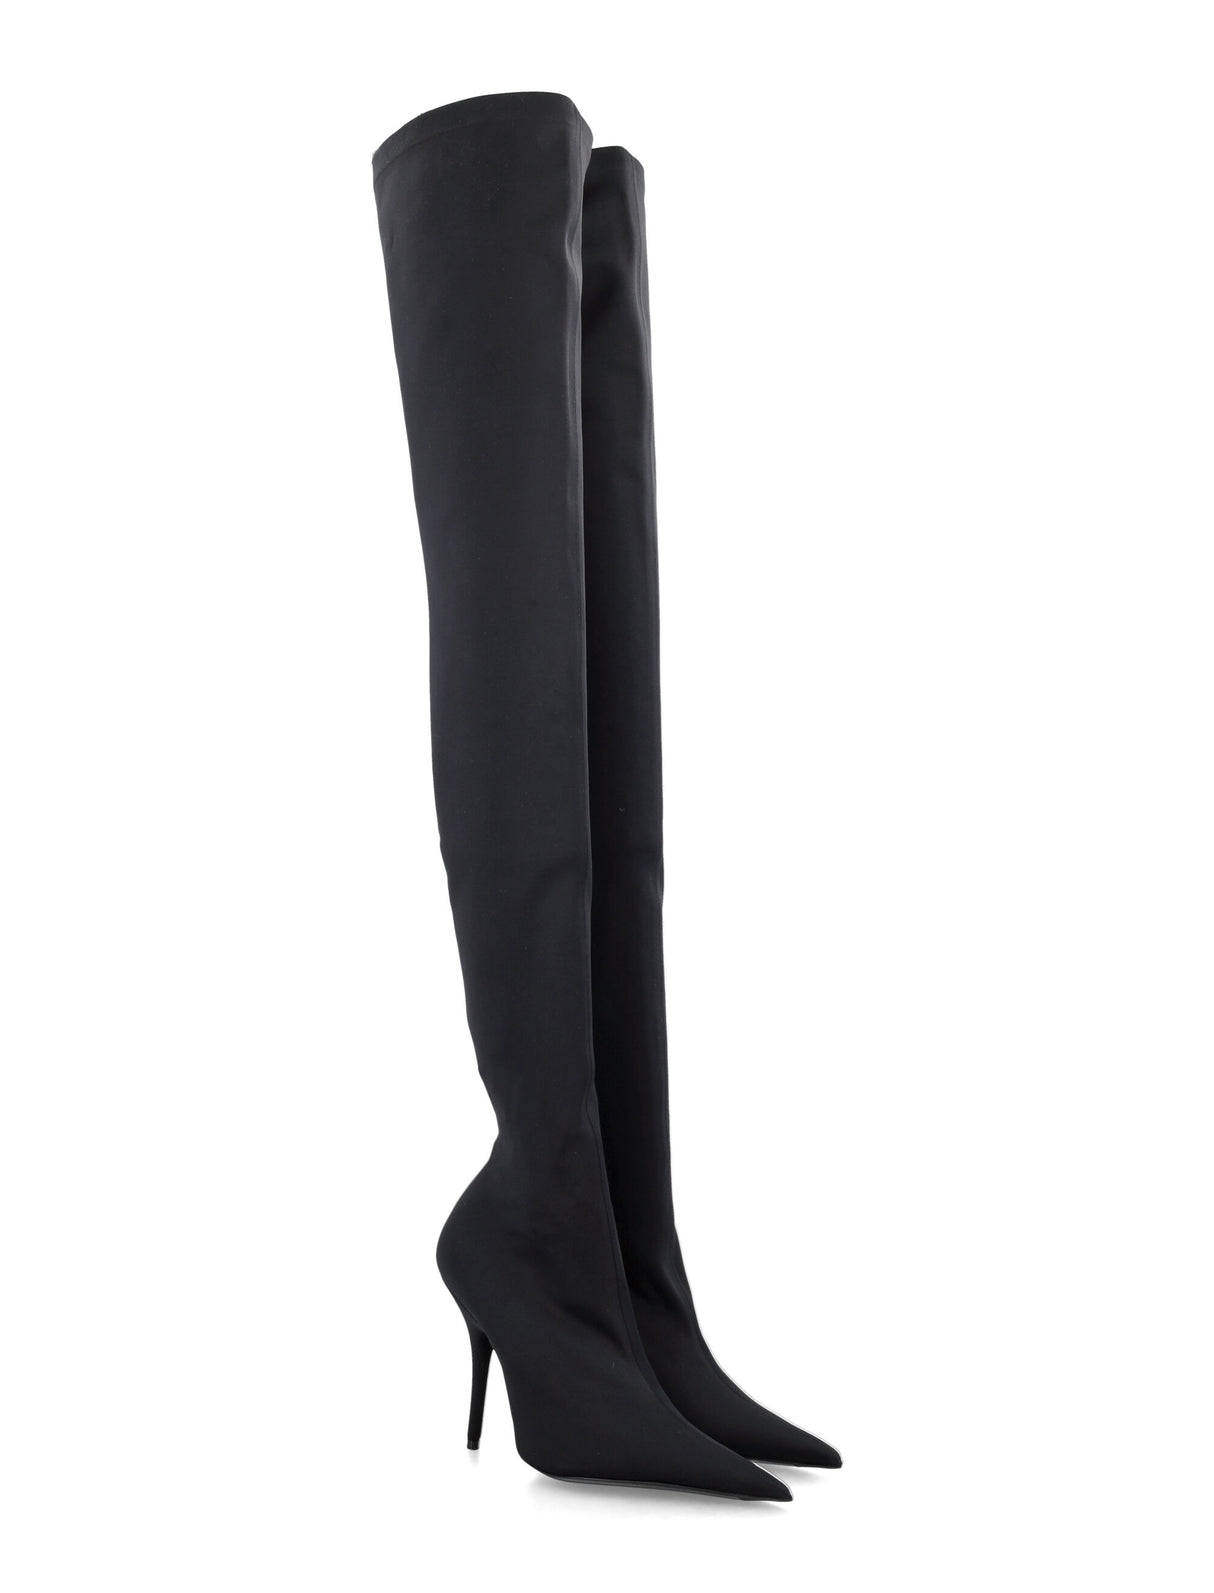 Black Over-The-Knee Boots with Pointed Toe and Stiletto Heel